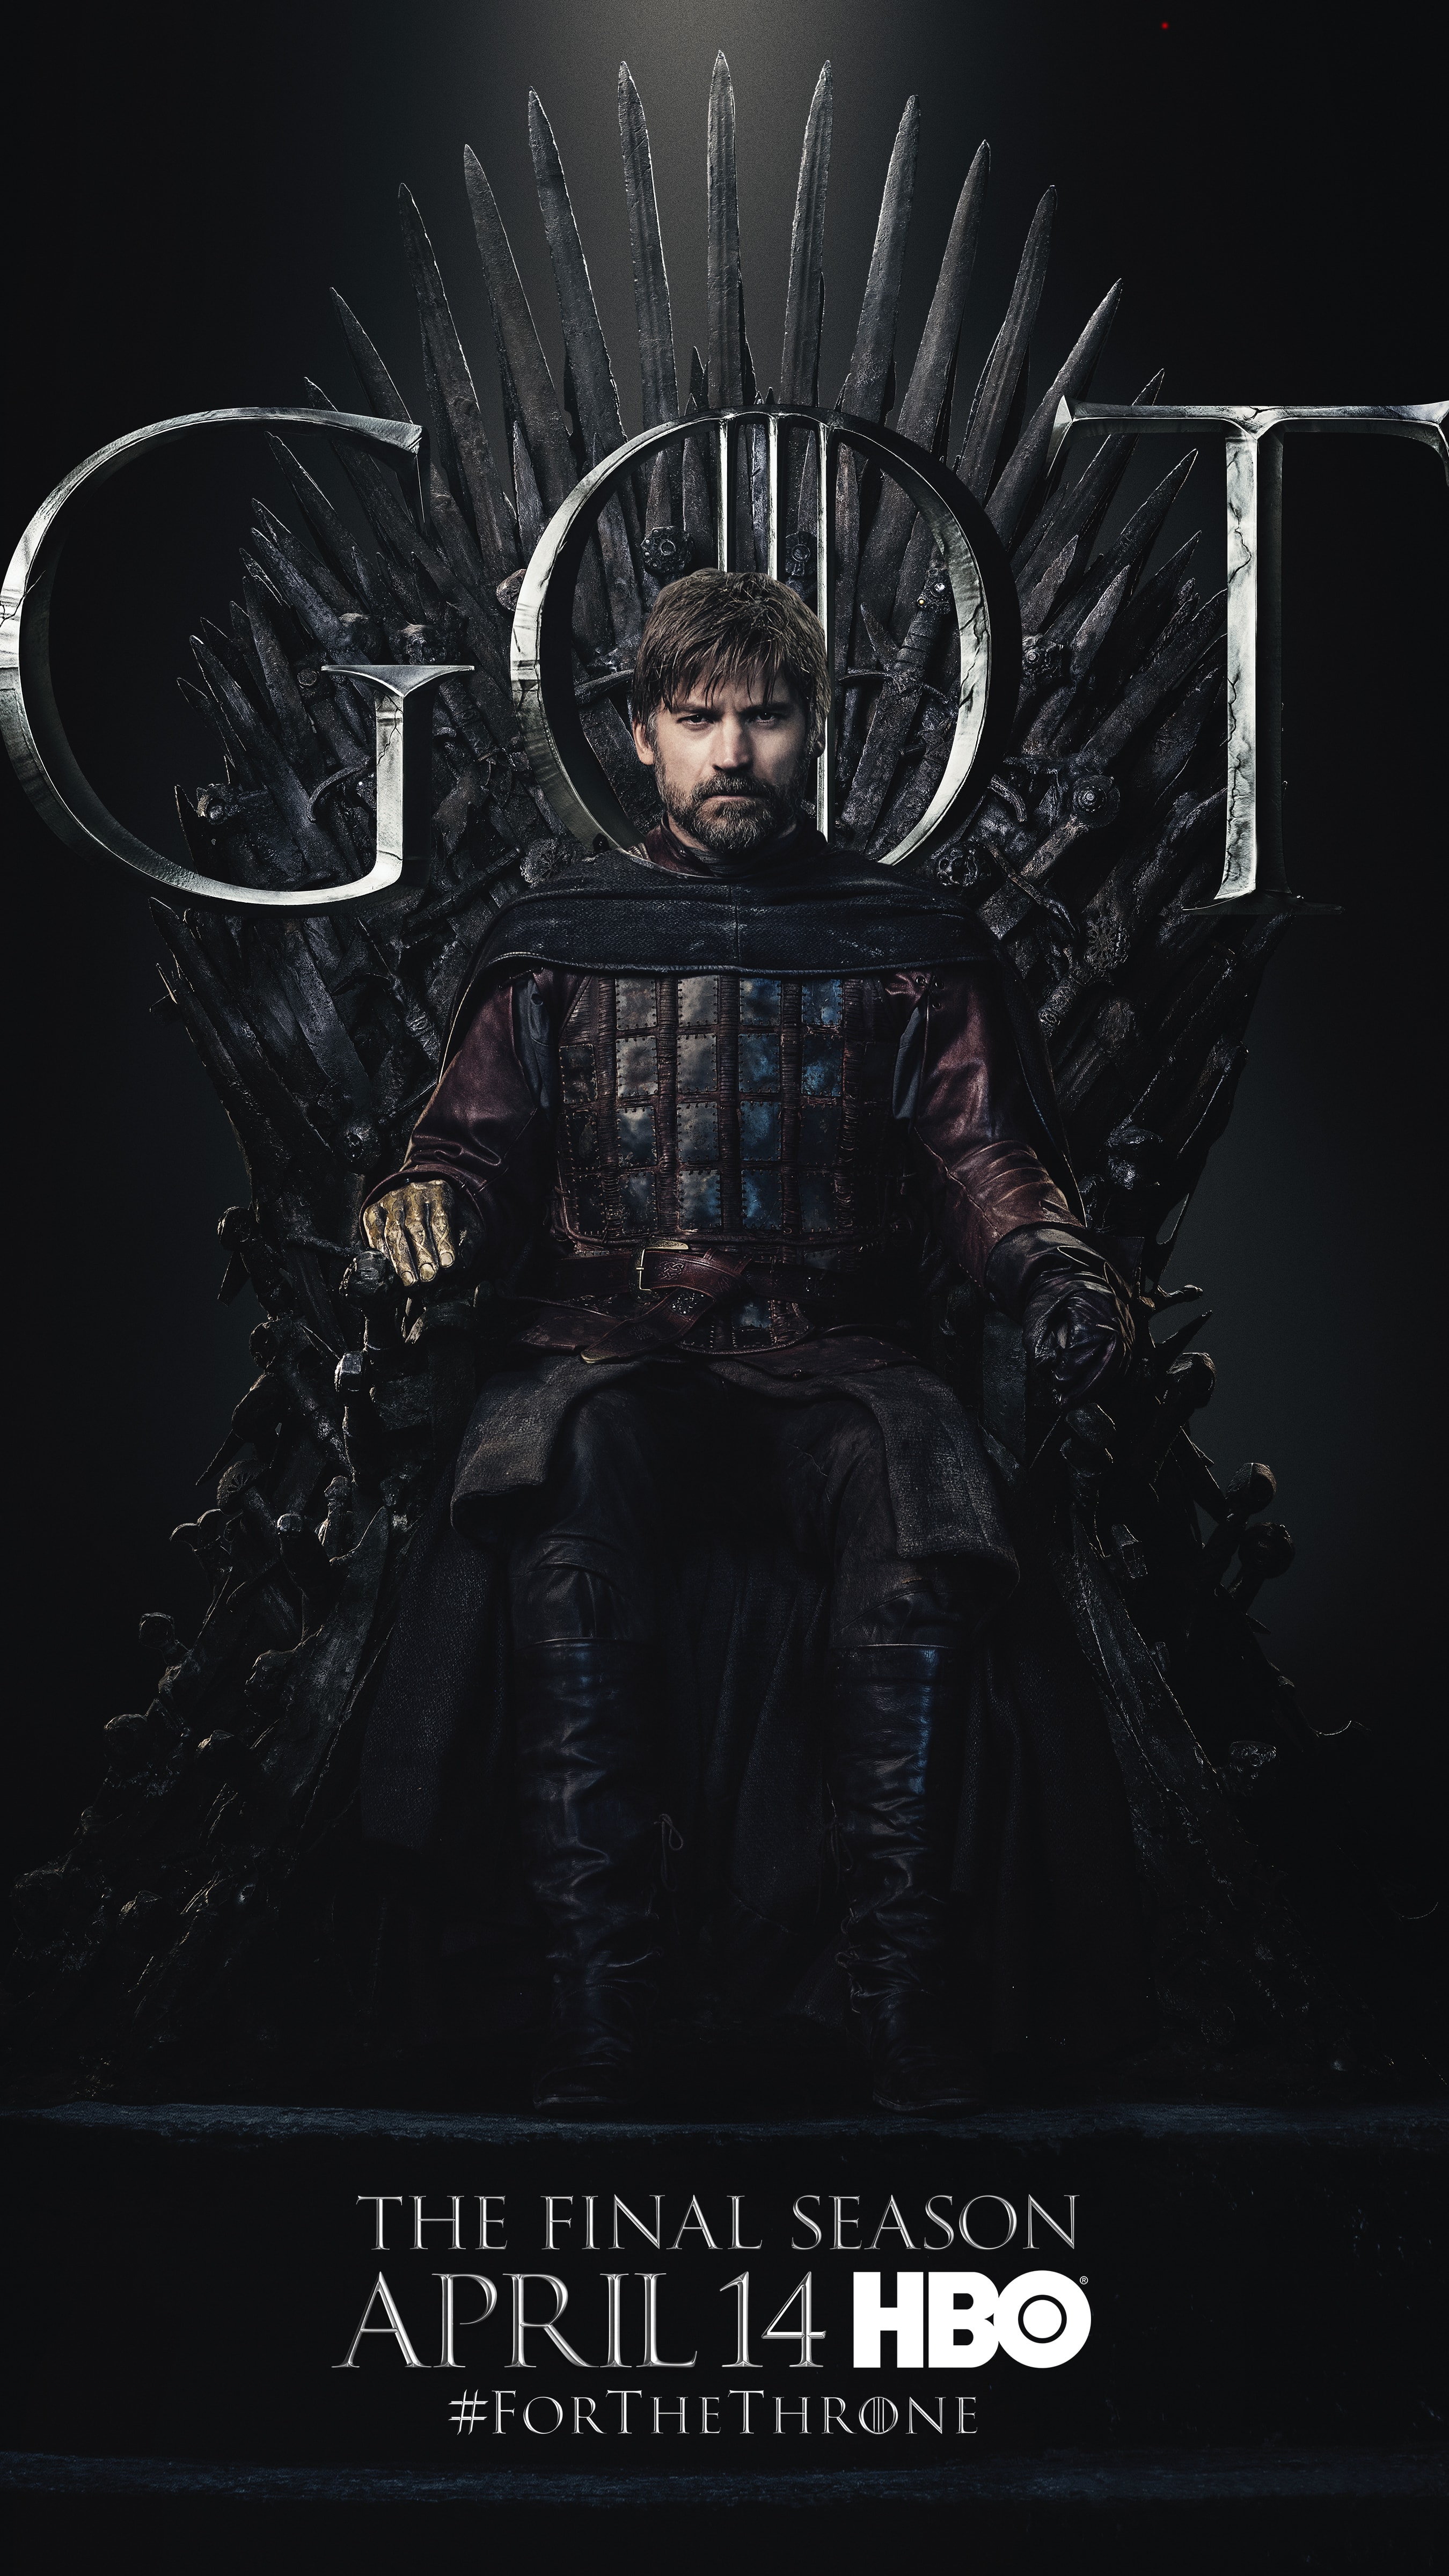 https://rozup.ir/up/justbarca/GOTS08/4.-Jaime-Lannister-GOT-Season-8-For-The-Throne-Character-Poster-min.jpg